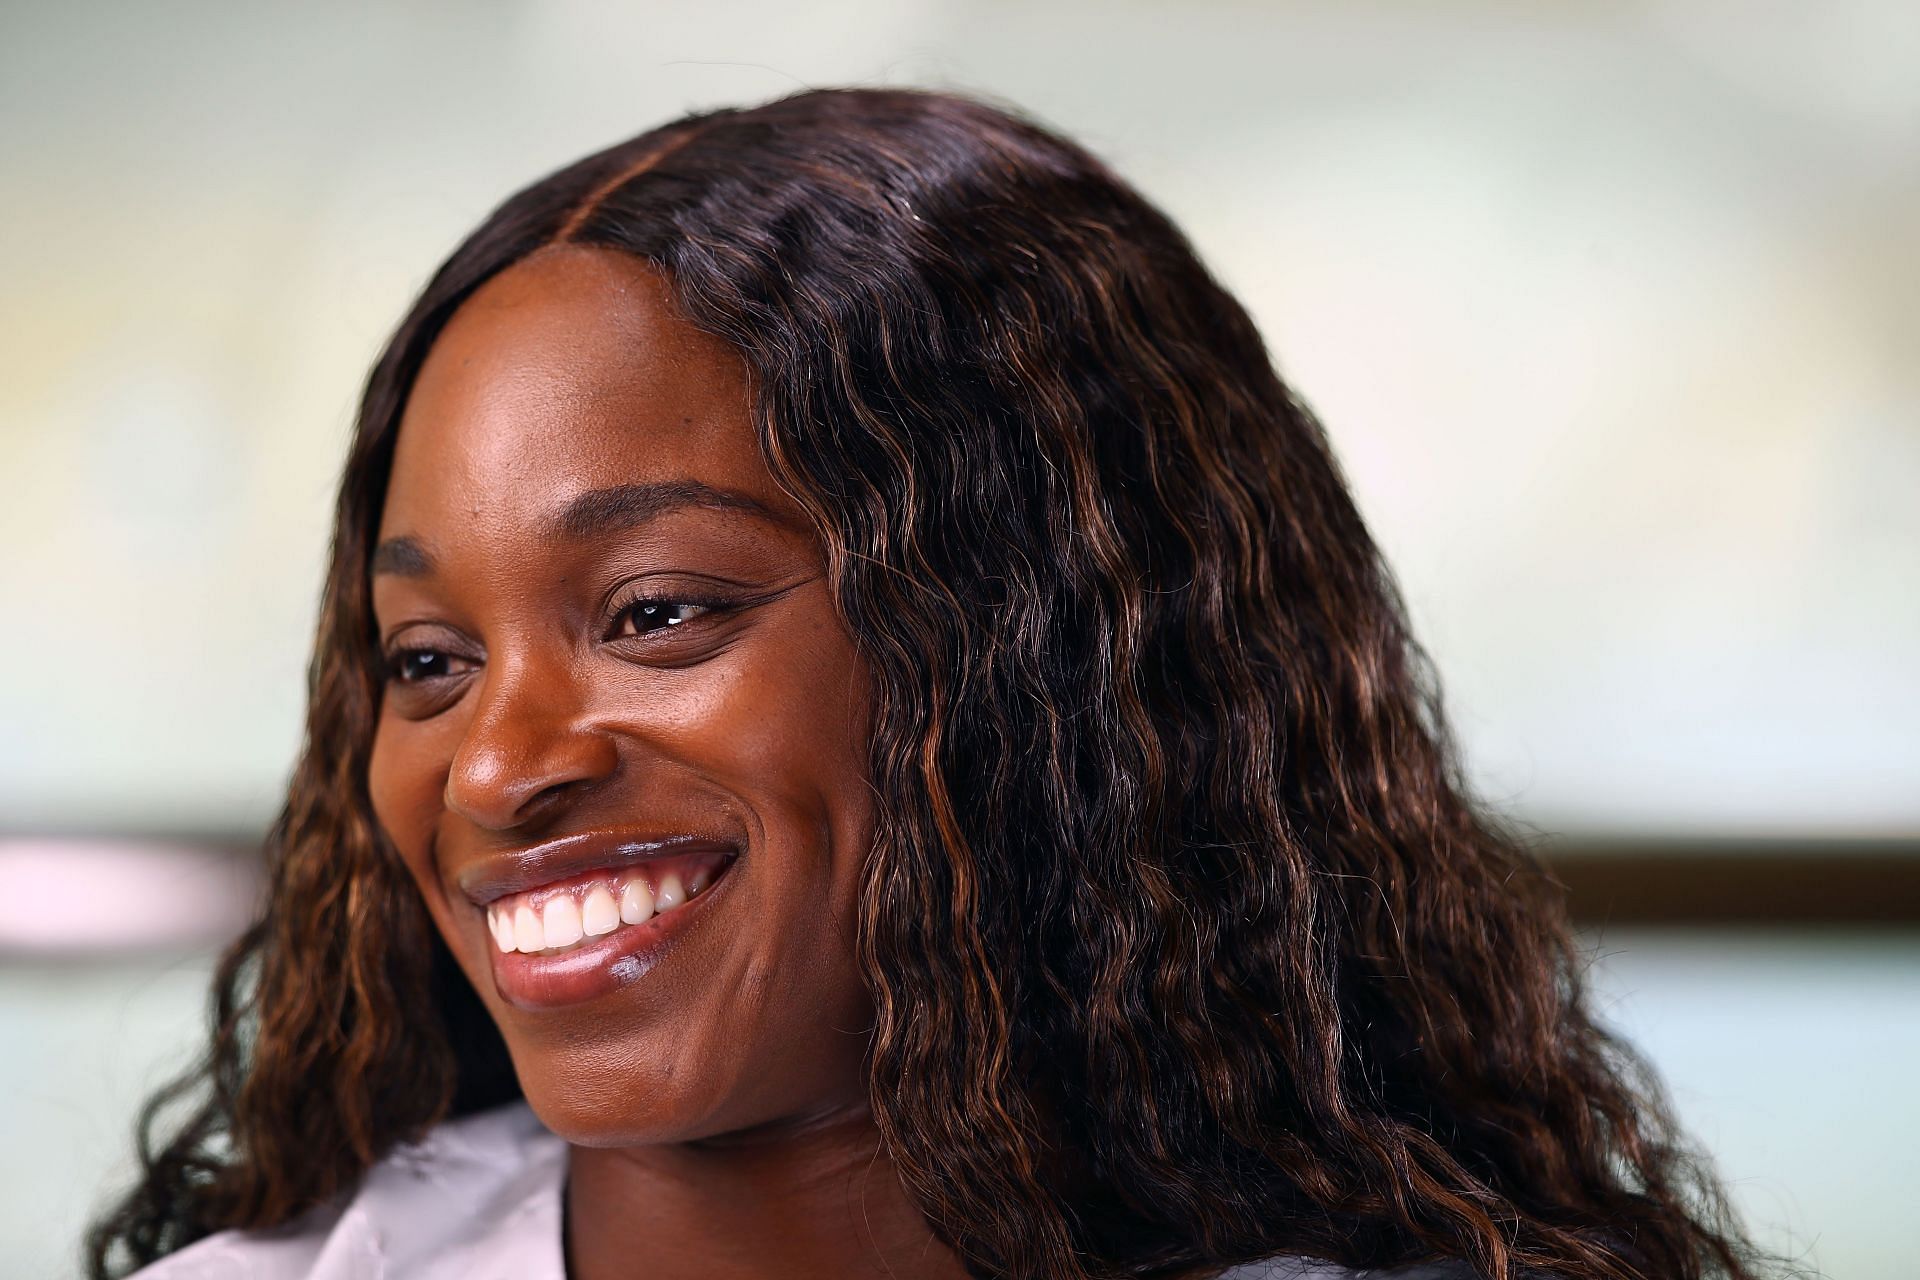 Sloane Stephens recently helped construct a school in Haiti